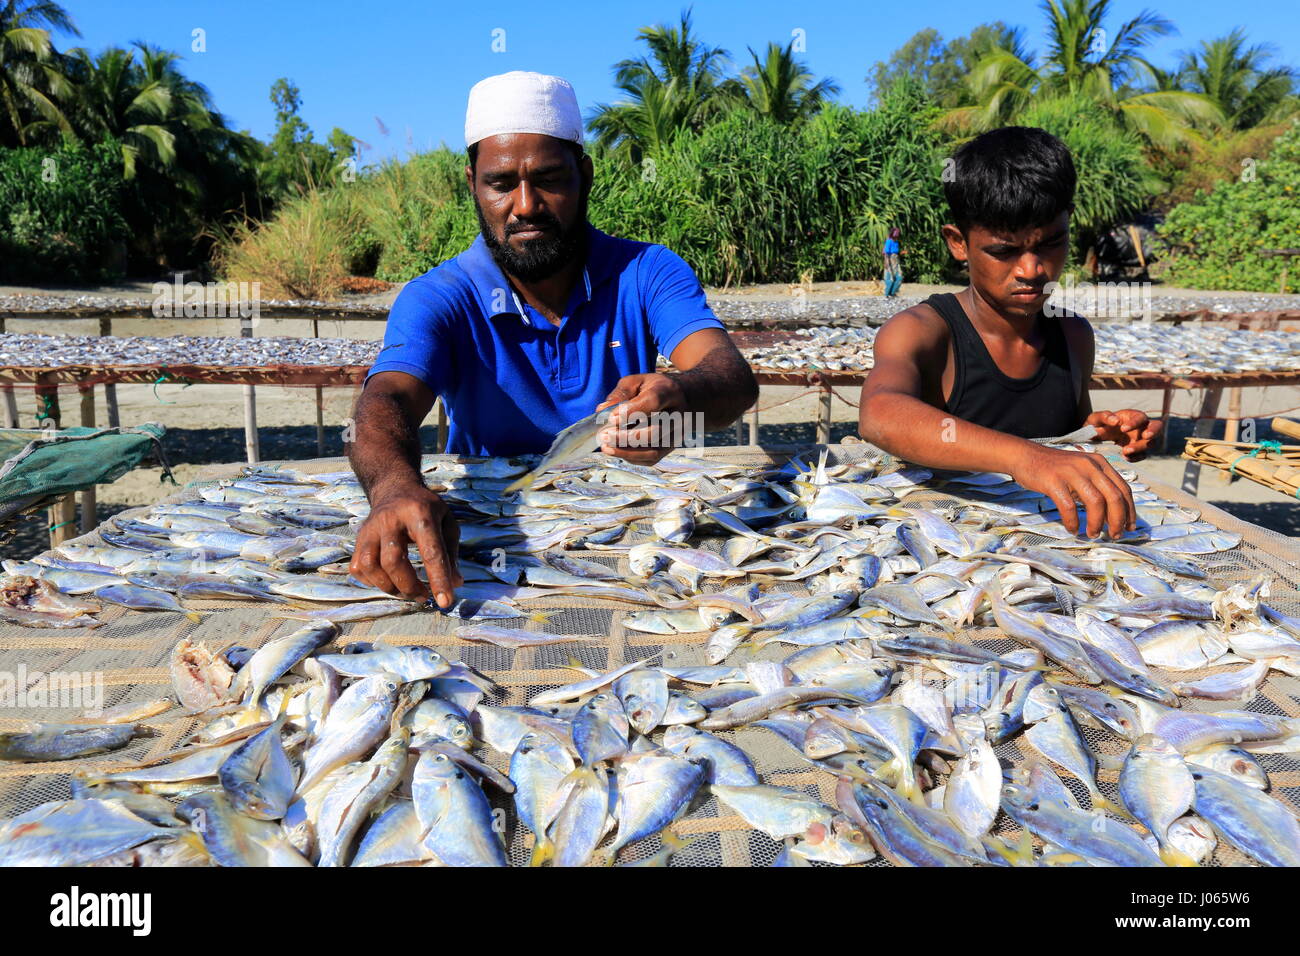 Workers processing fish to be dried at Saint Martin, Locally known as Narikel Jinjira, it is the only coral island of Bangladesh.Coxs Bazar, Banglades Stock Photo